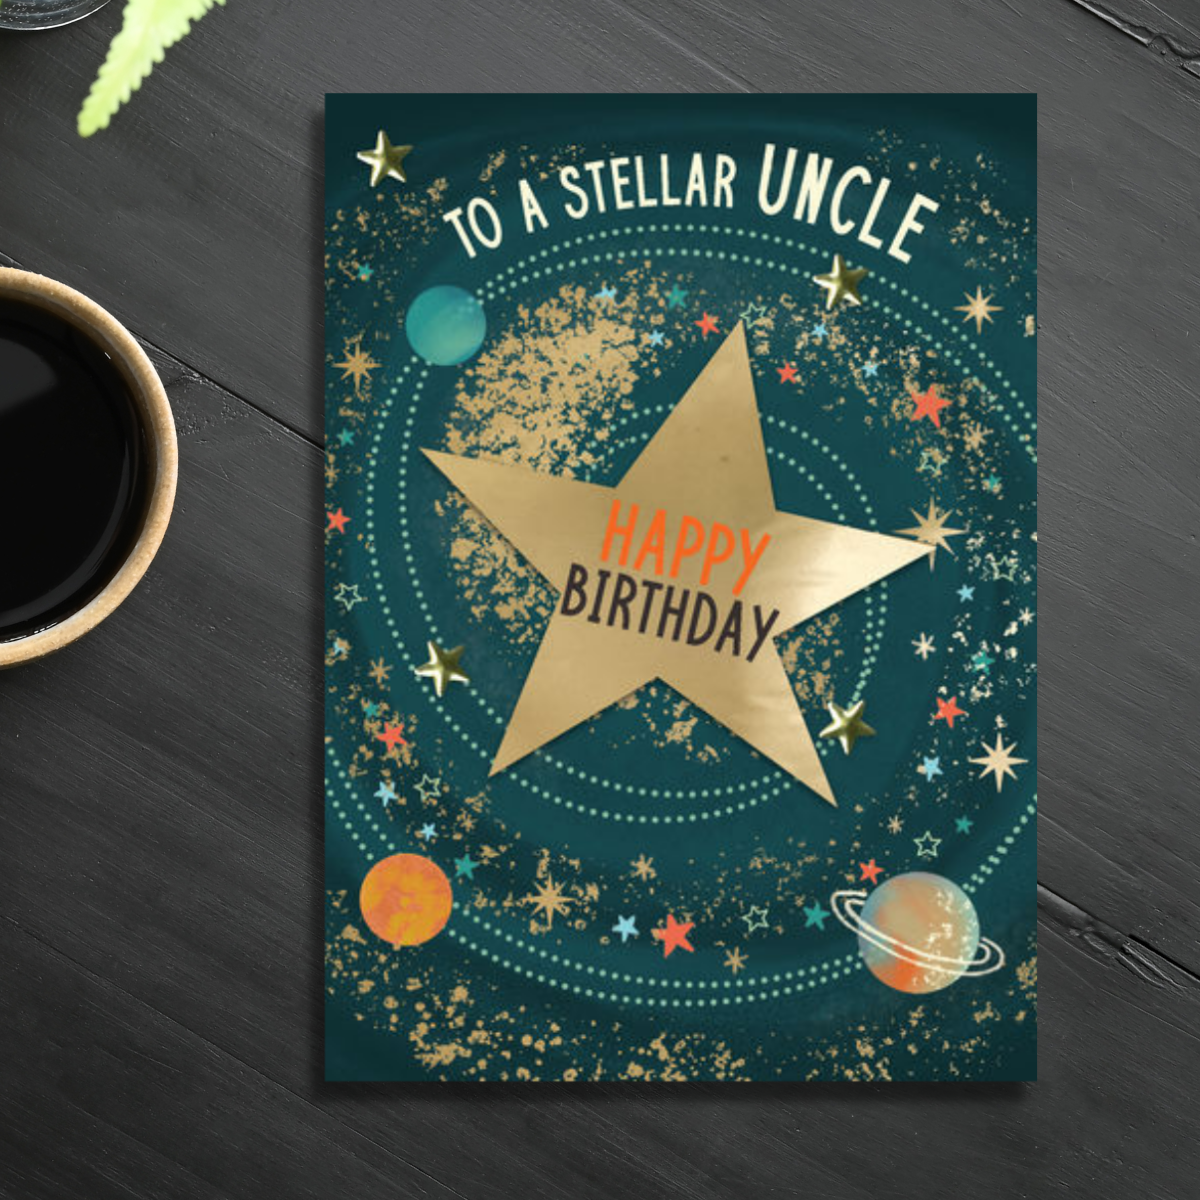 Green card with stars and planets in gold foil